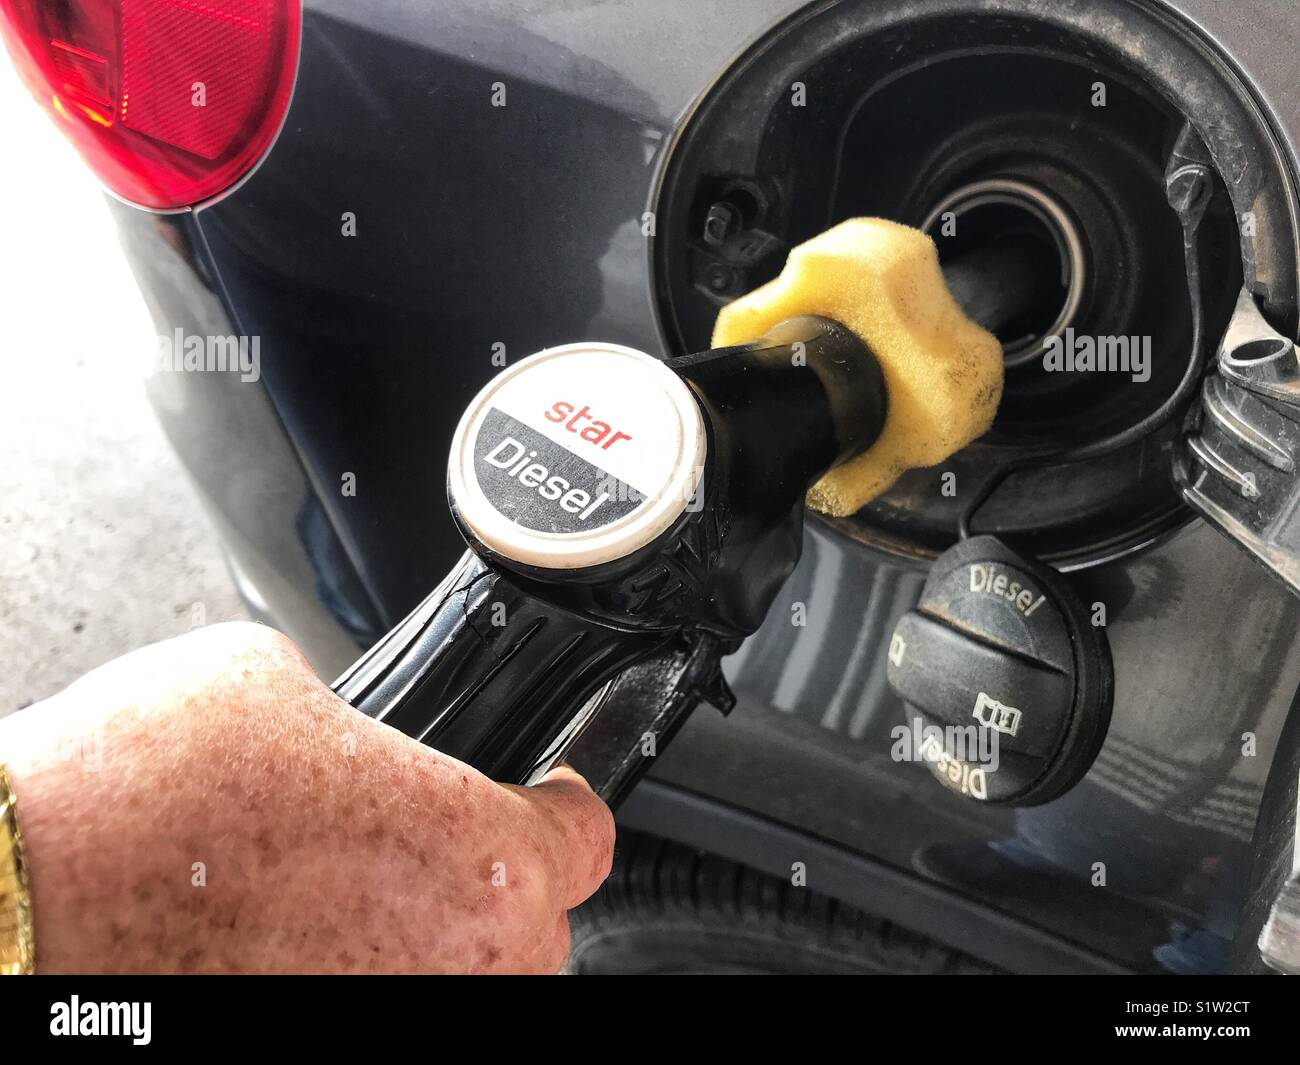 Filling diesel at a gas station Stock Photo